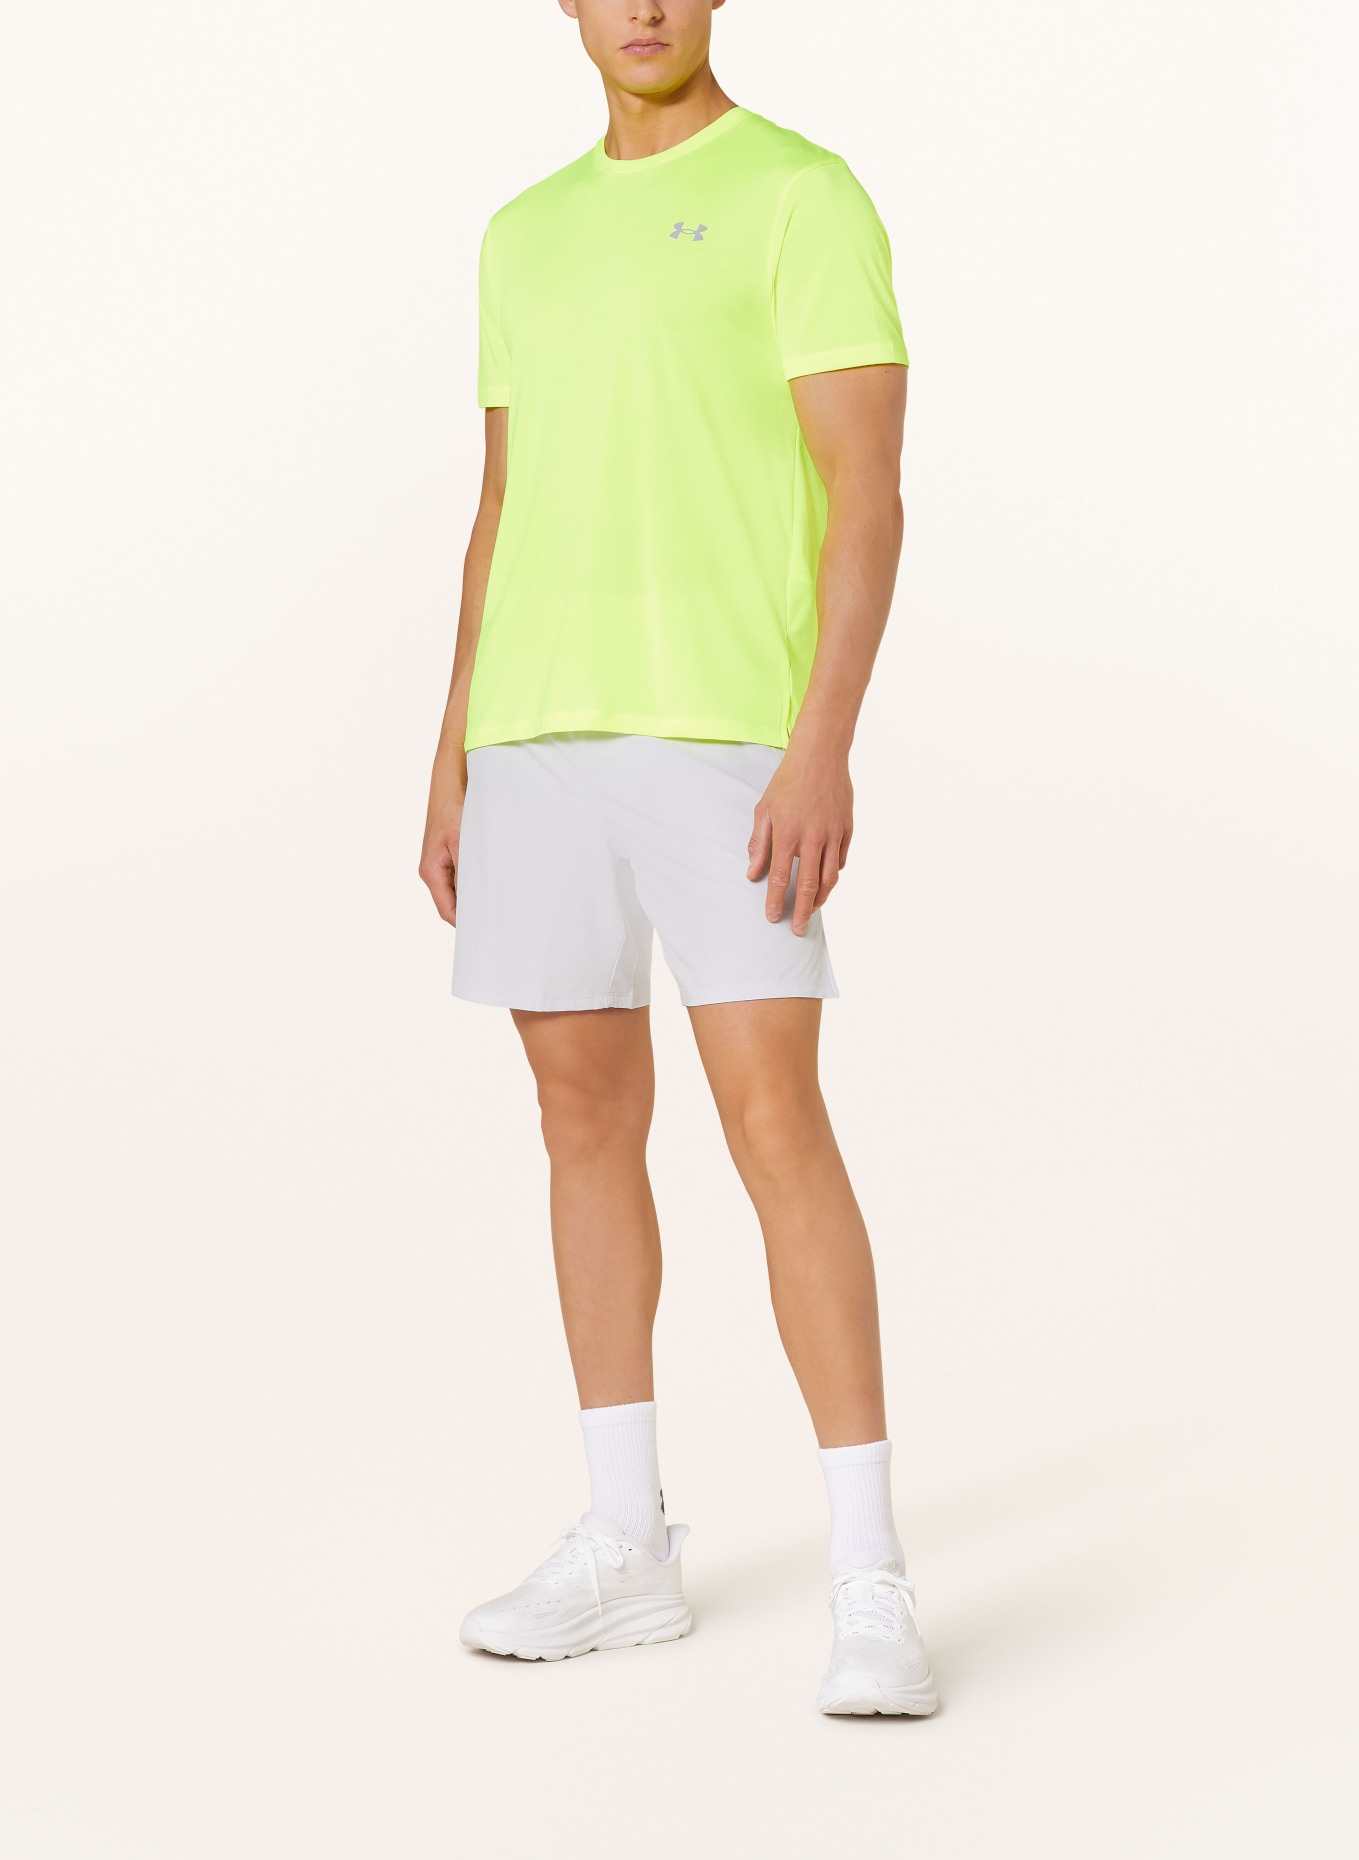 UNDER ARMOUR 2-in-1 running shorts UA LAUNCH ELITE, Color: LIGHT GRAY/ NEON YELLOW (Image 2)